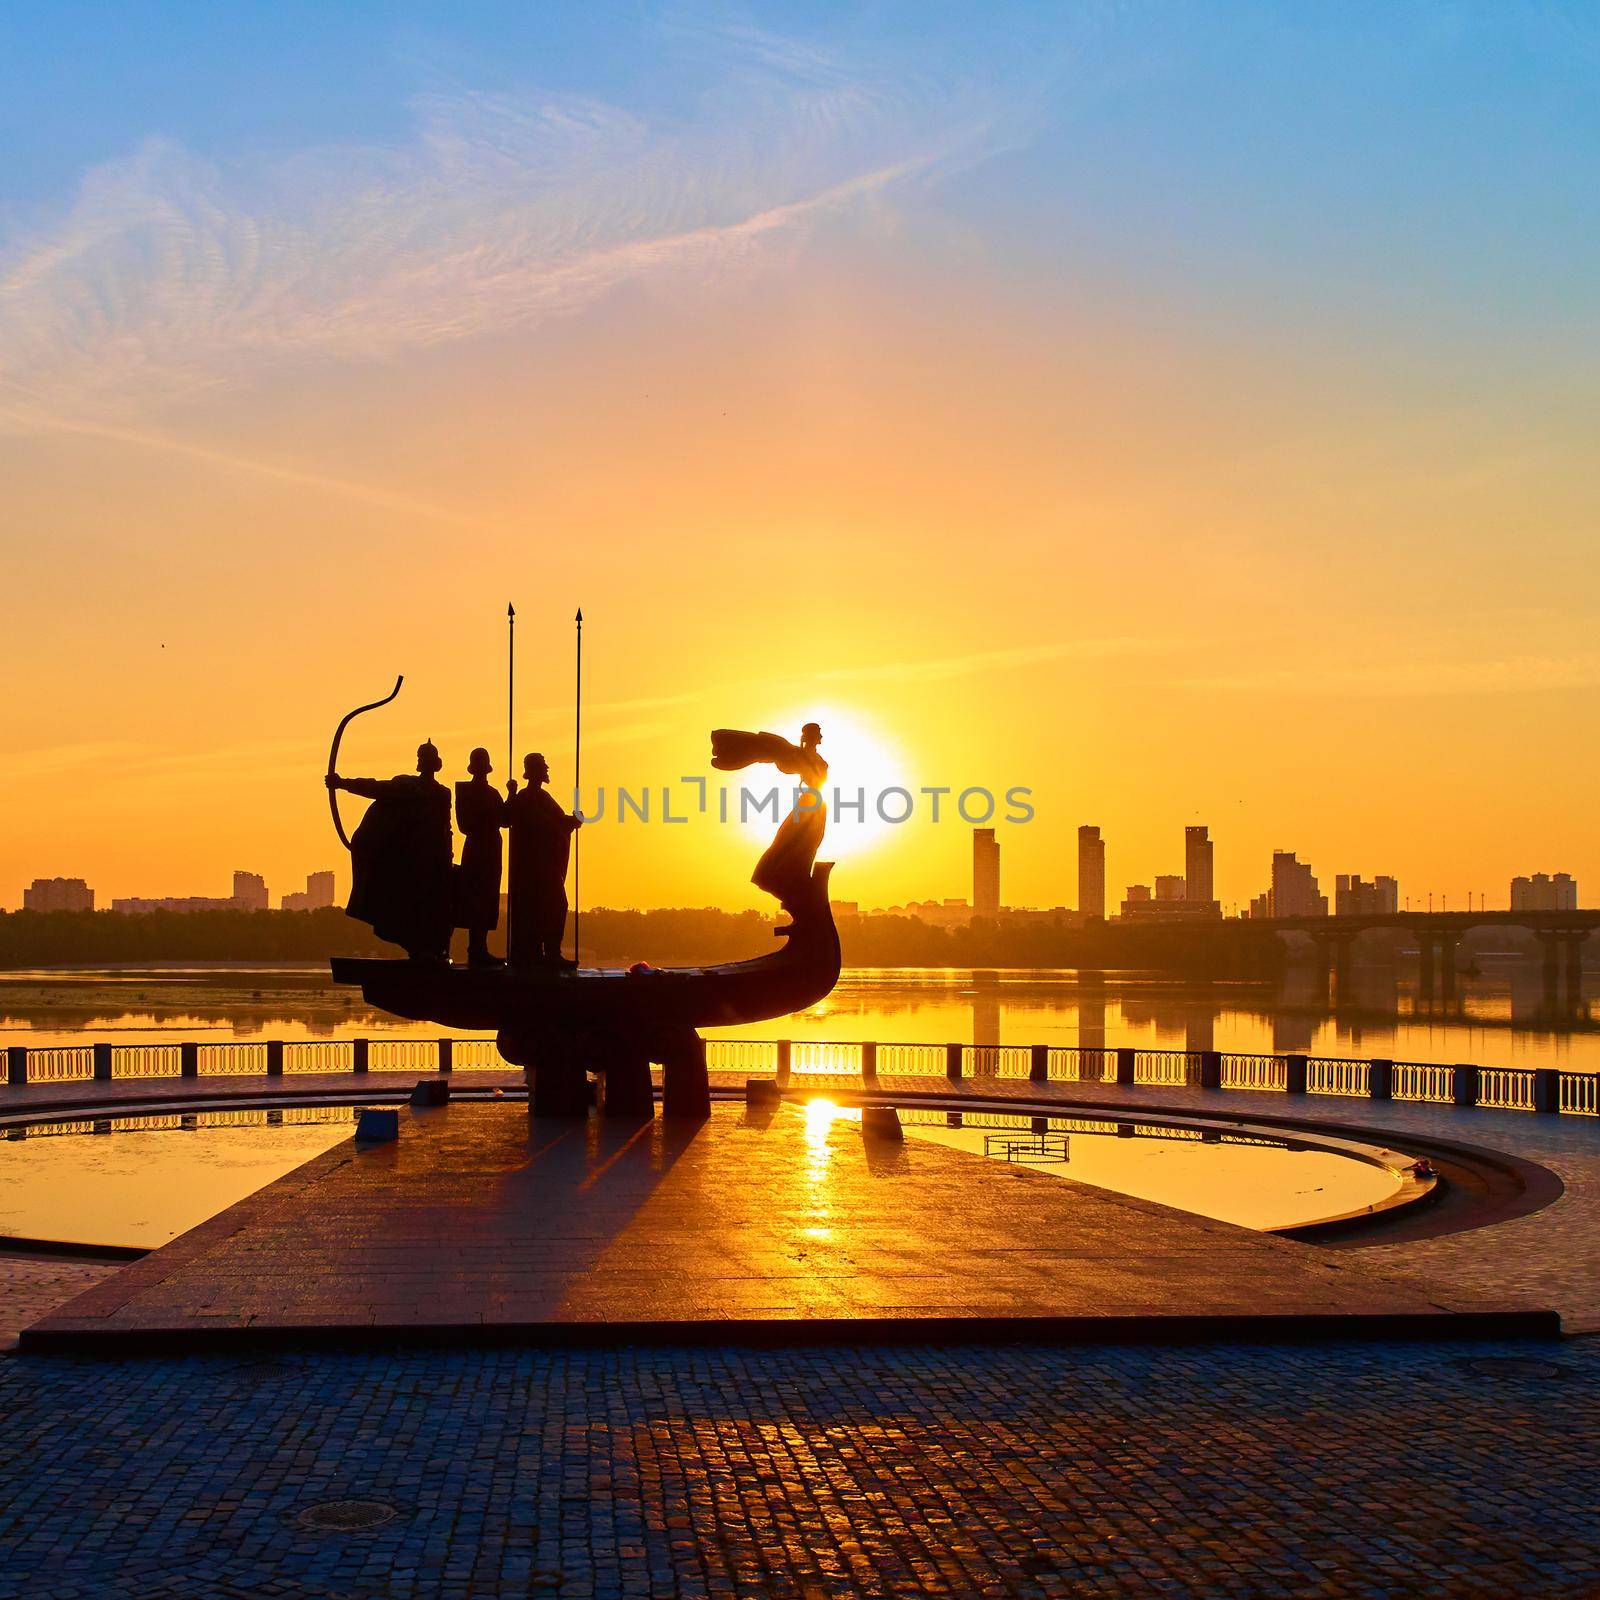 Monument to the founders of Kyiv at sunrise, wide-angle view with blue sky and yellow sun. Statue of Kyi, Shchek, Horyv and Lybid